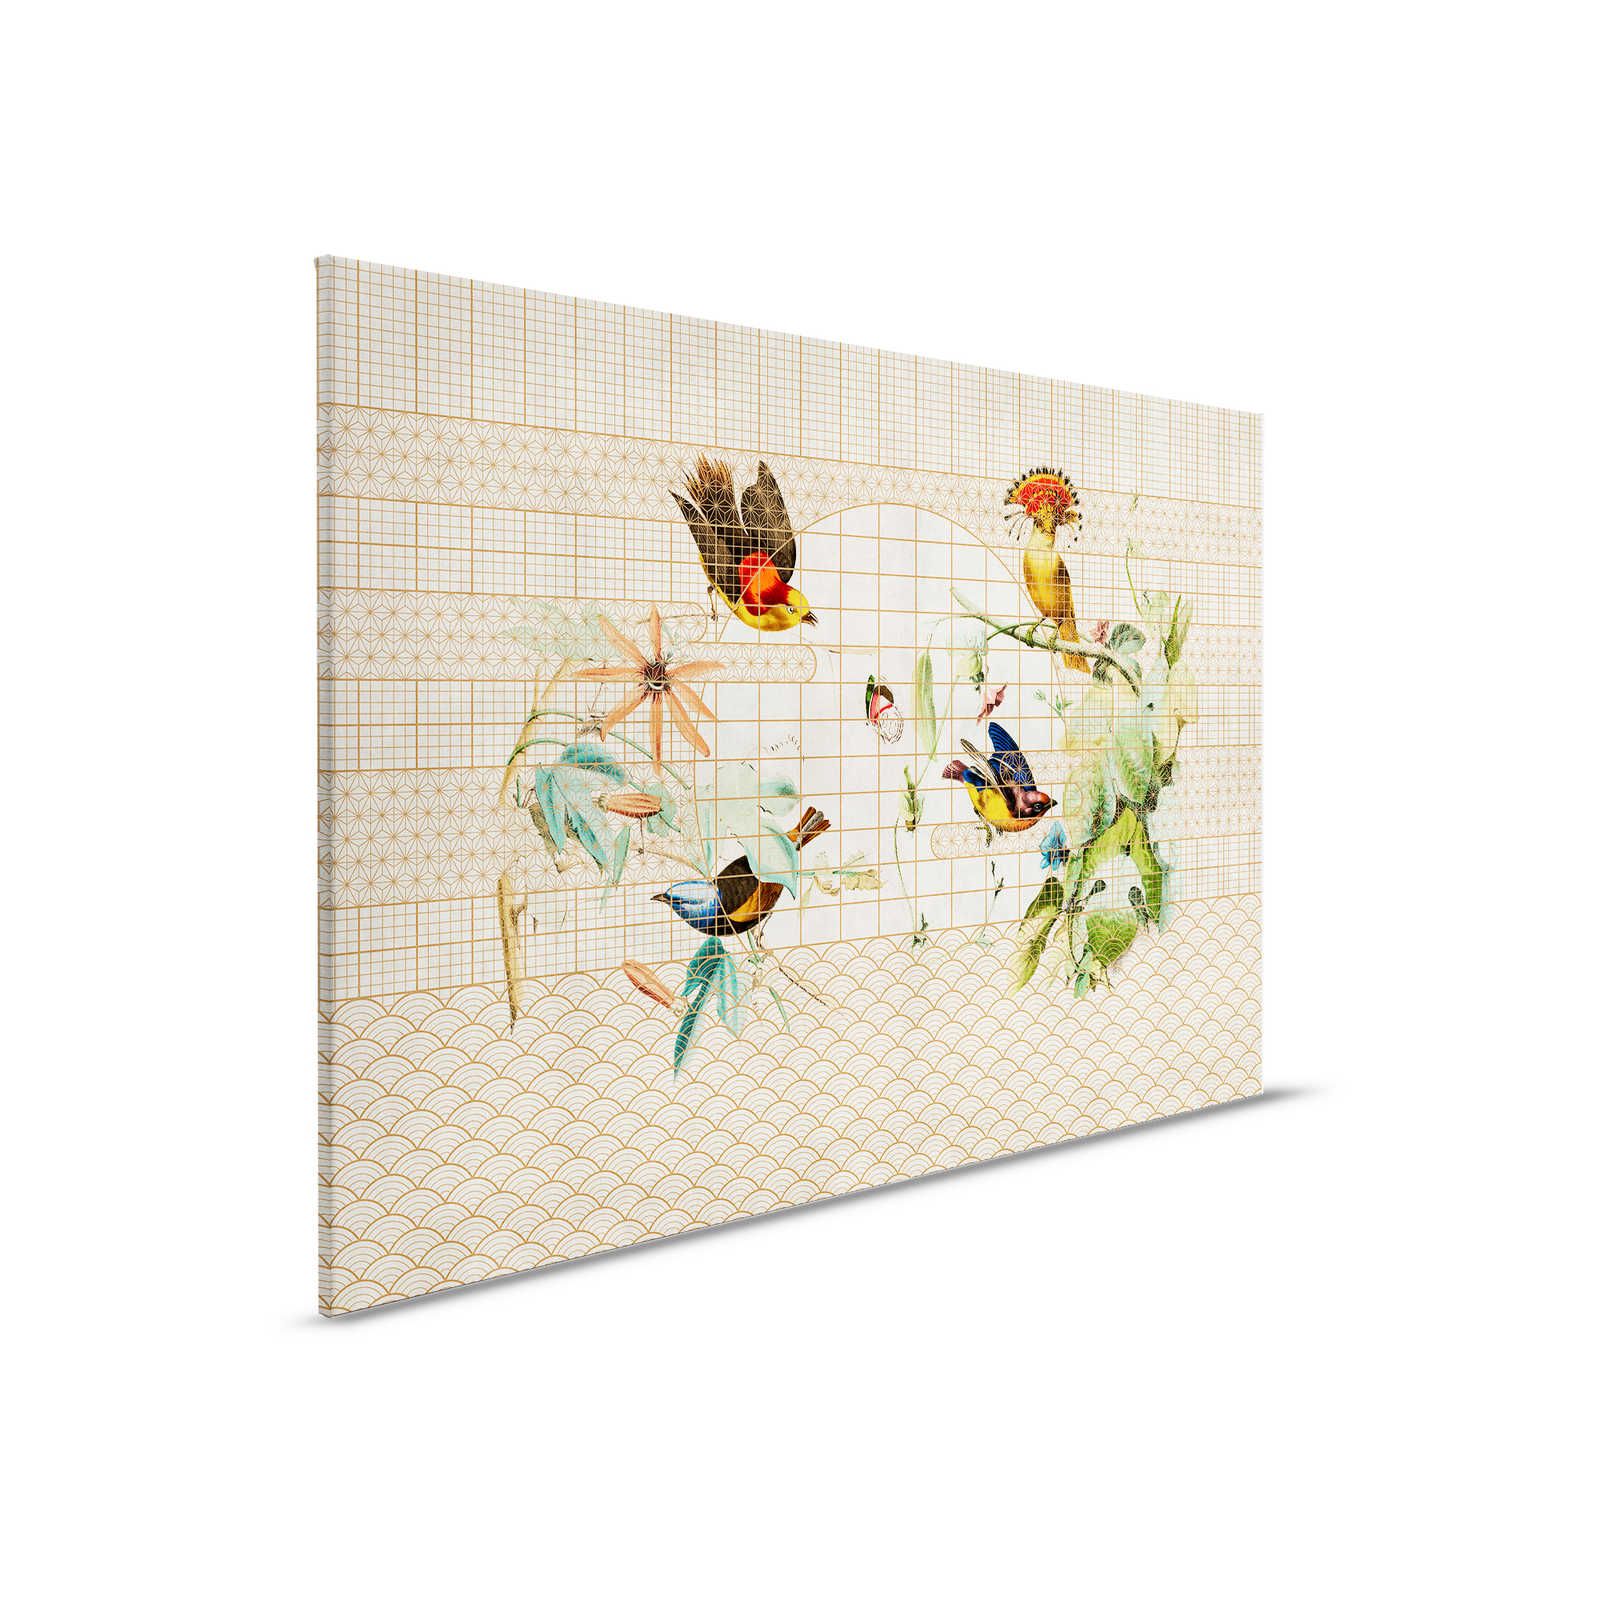         Aviary 1 - Canvas painting Birds & butterflies in golden aviary - 0,90 m x 0,60 m
    